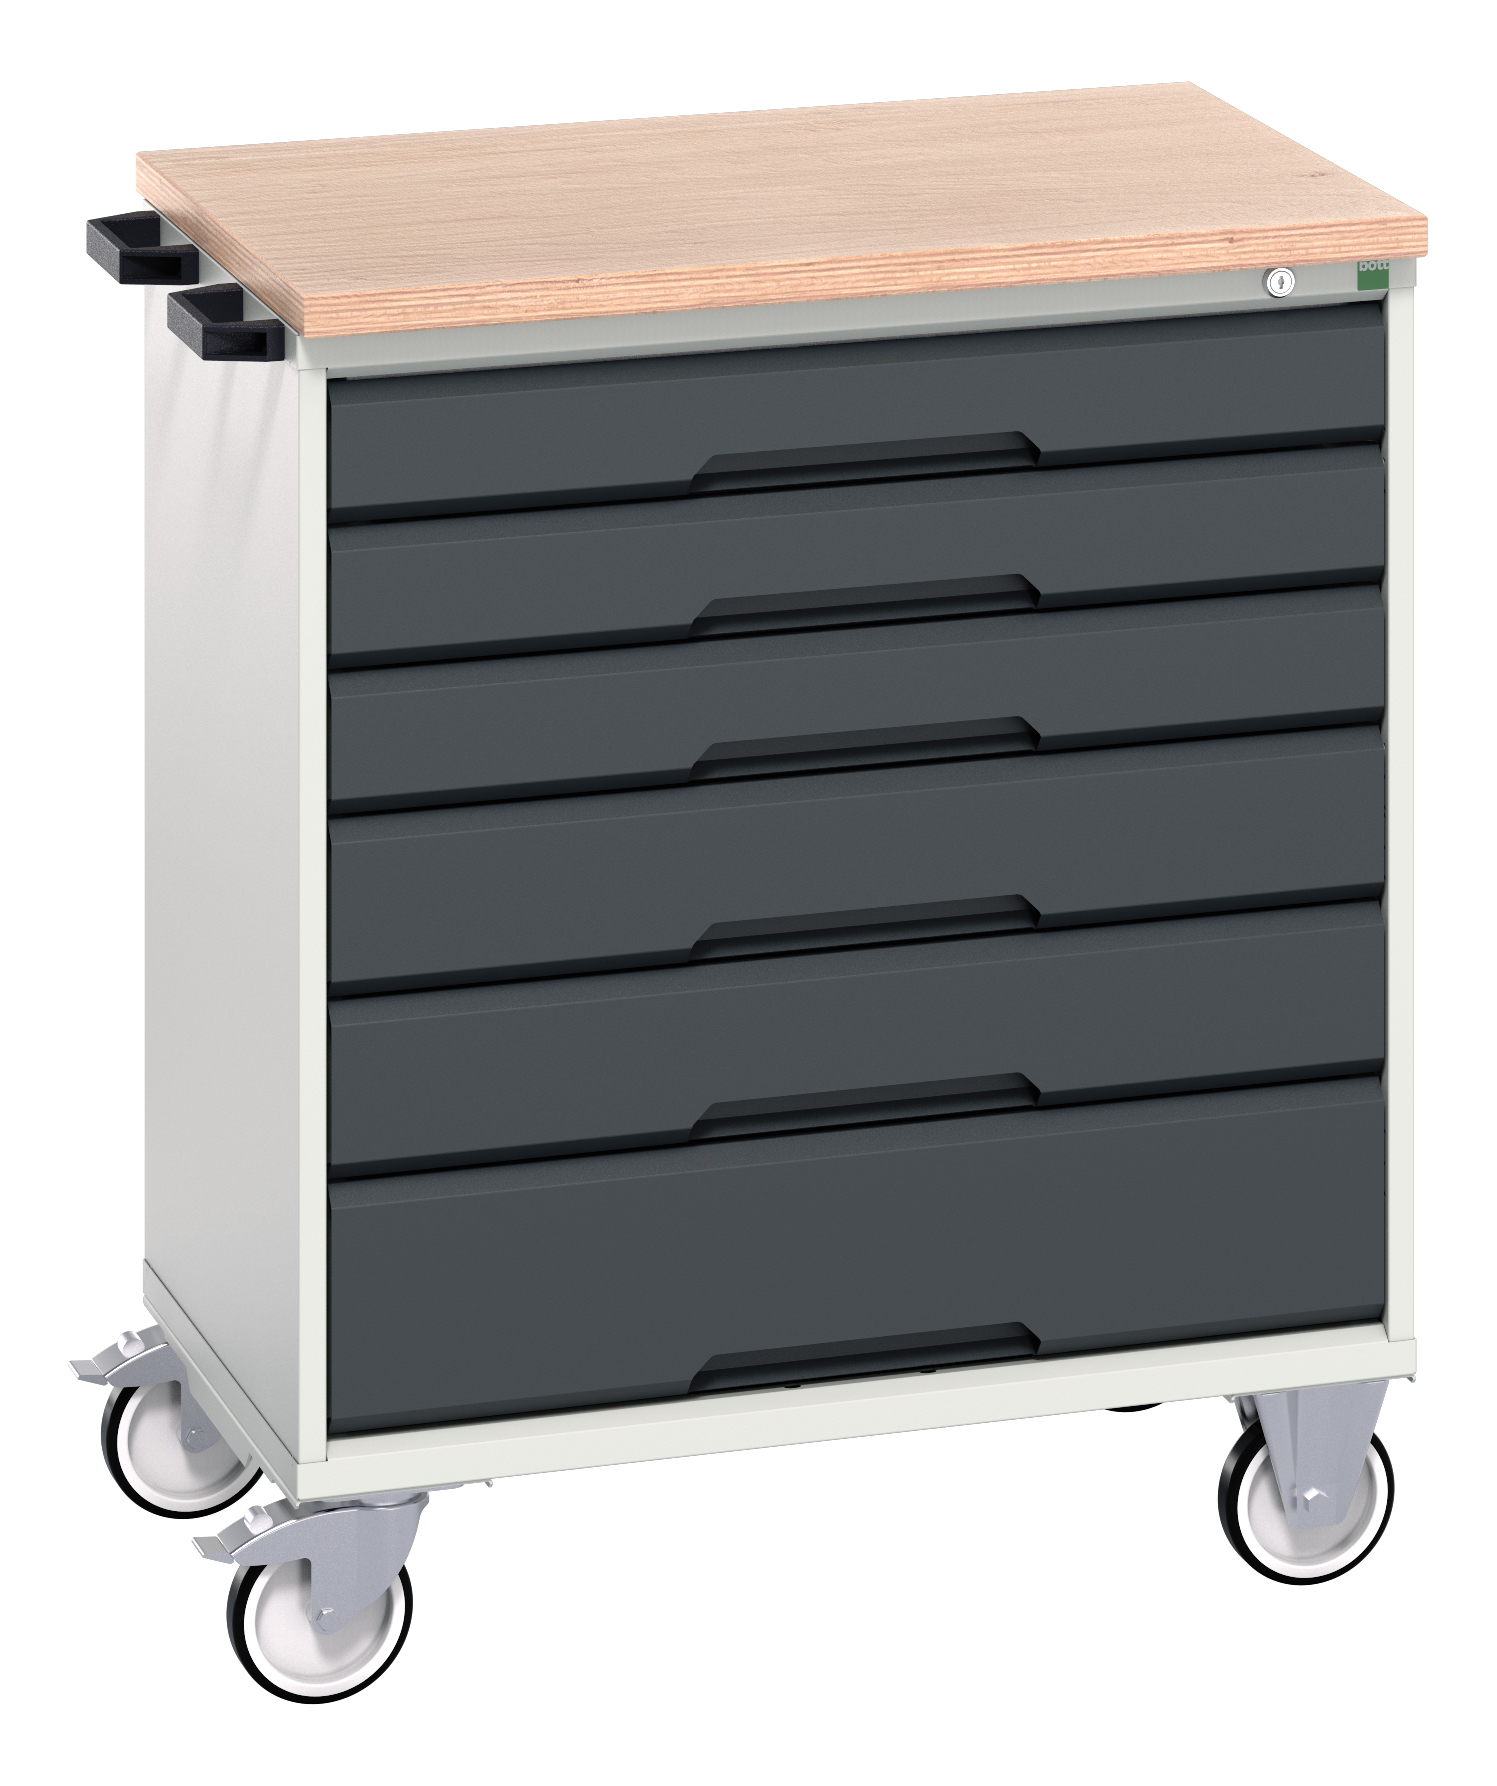 Bott Verso Mobile Drawer Cabinet With 6 Drawers & Multiplex Top - 16927004.19